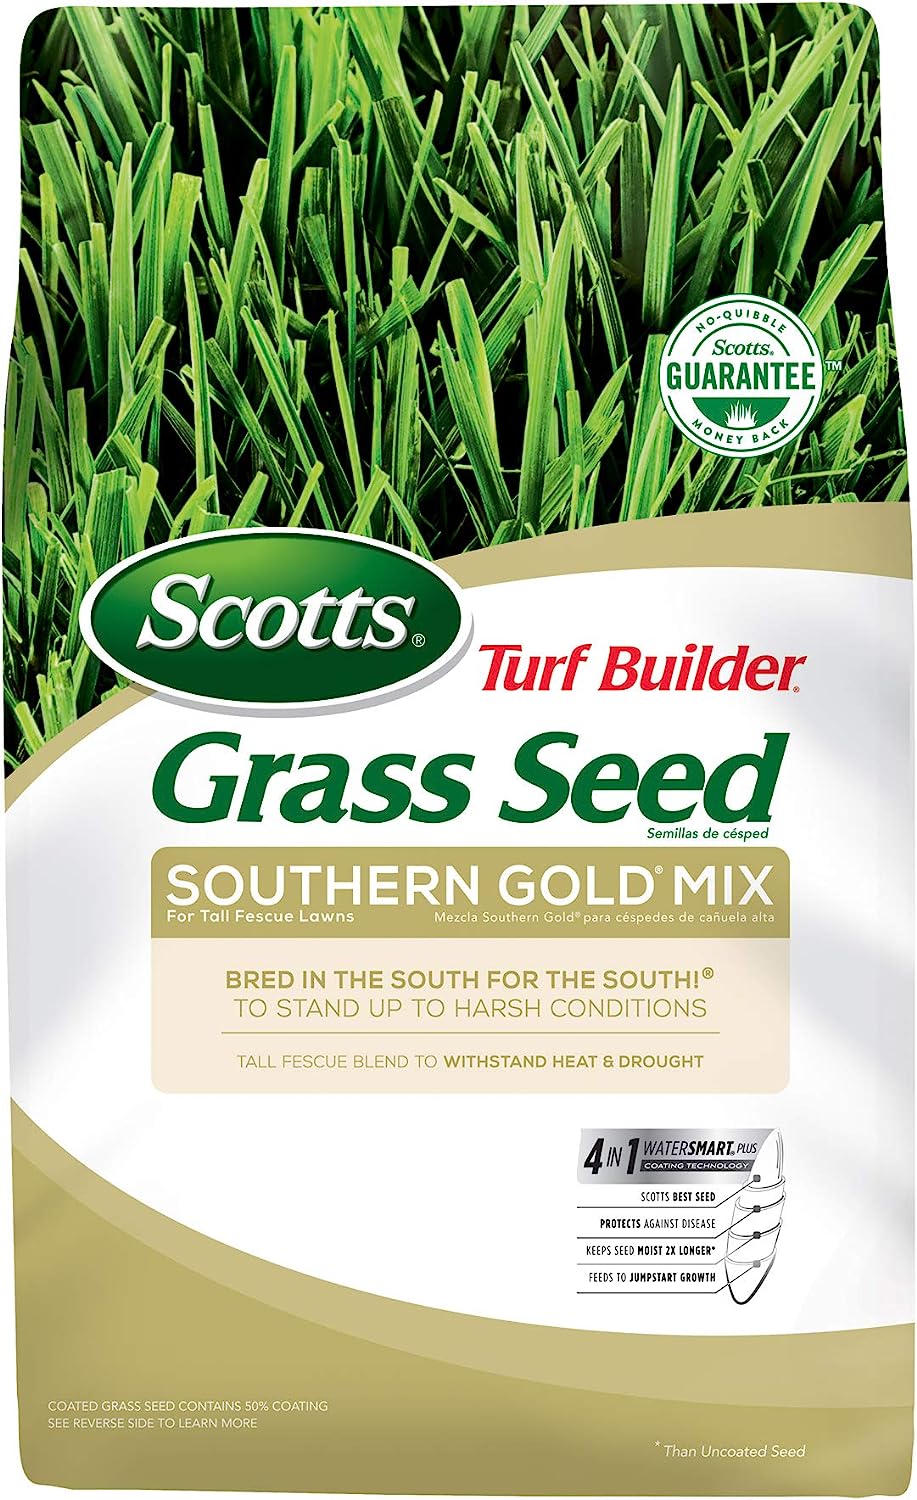 Scotts Turf Builder Southern Gold Mix for Tall Fescue [...]